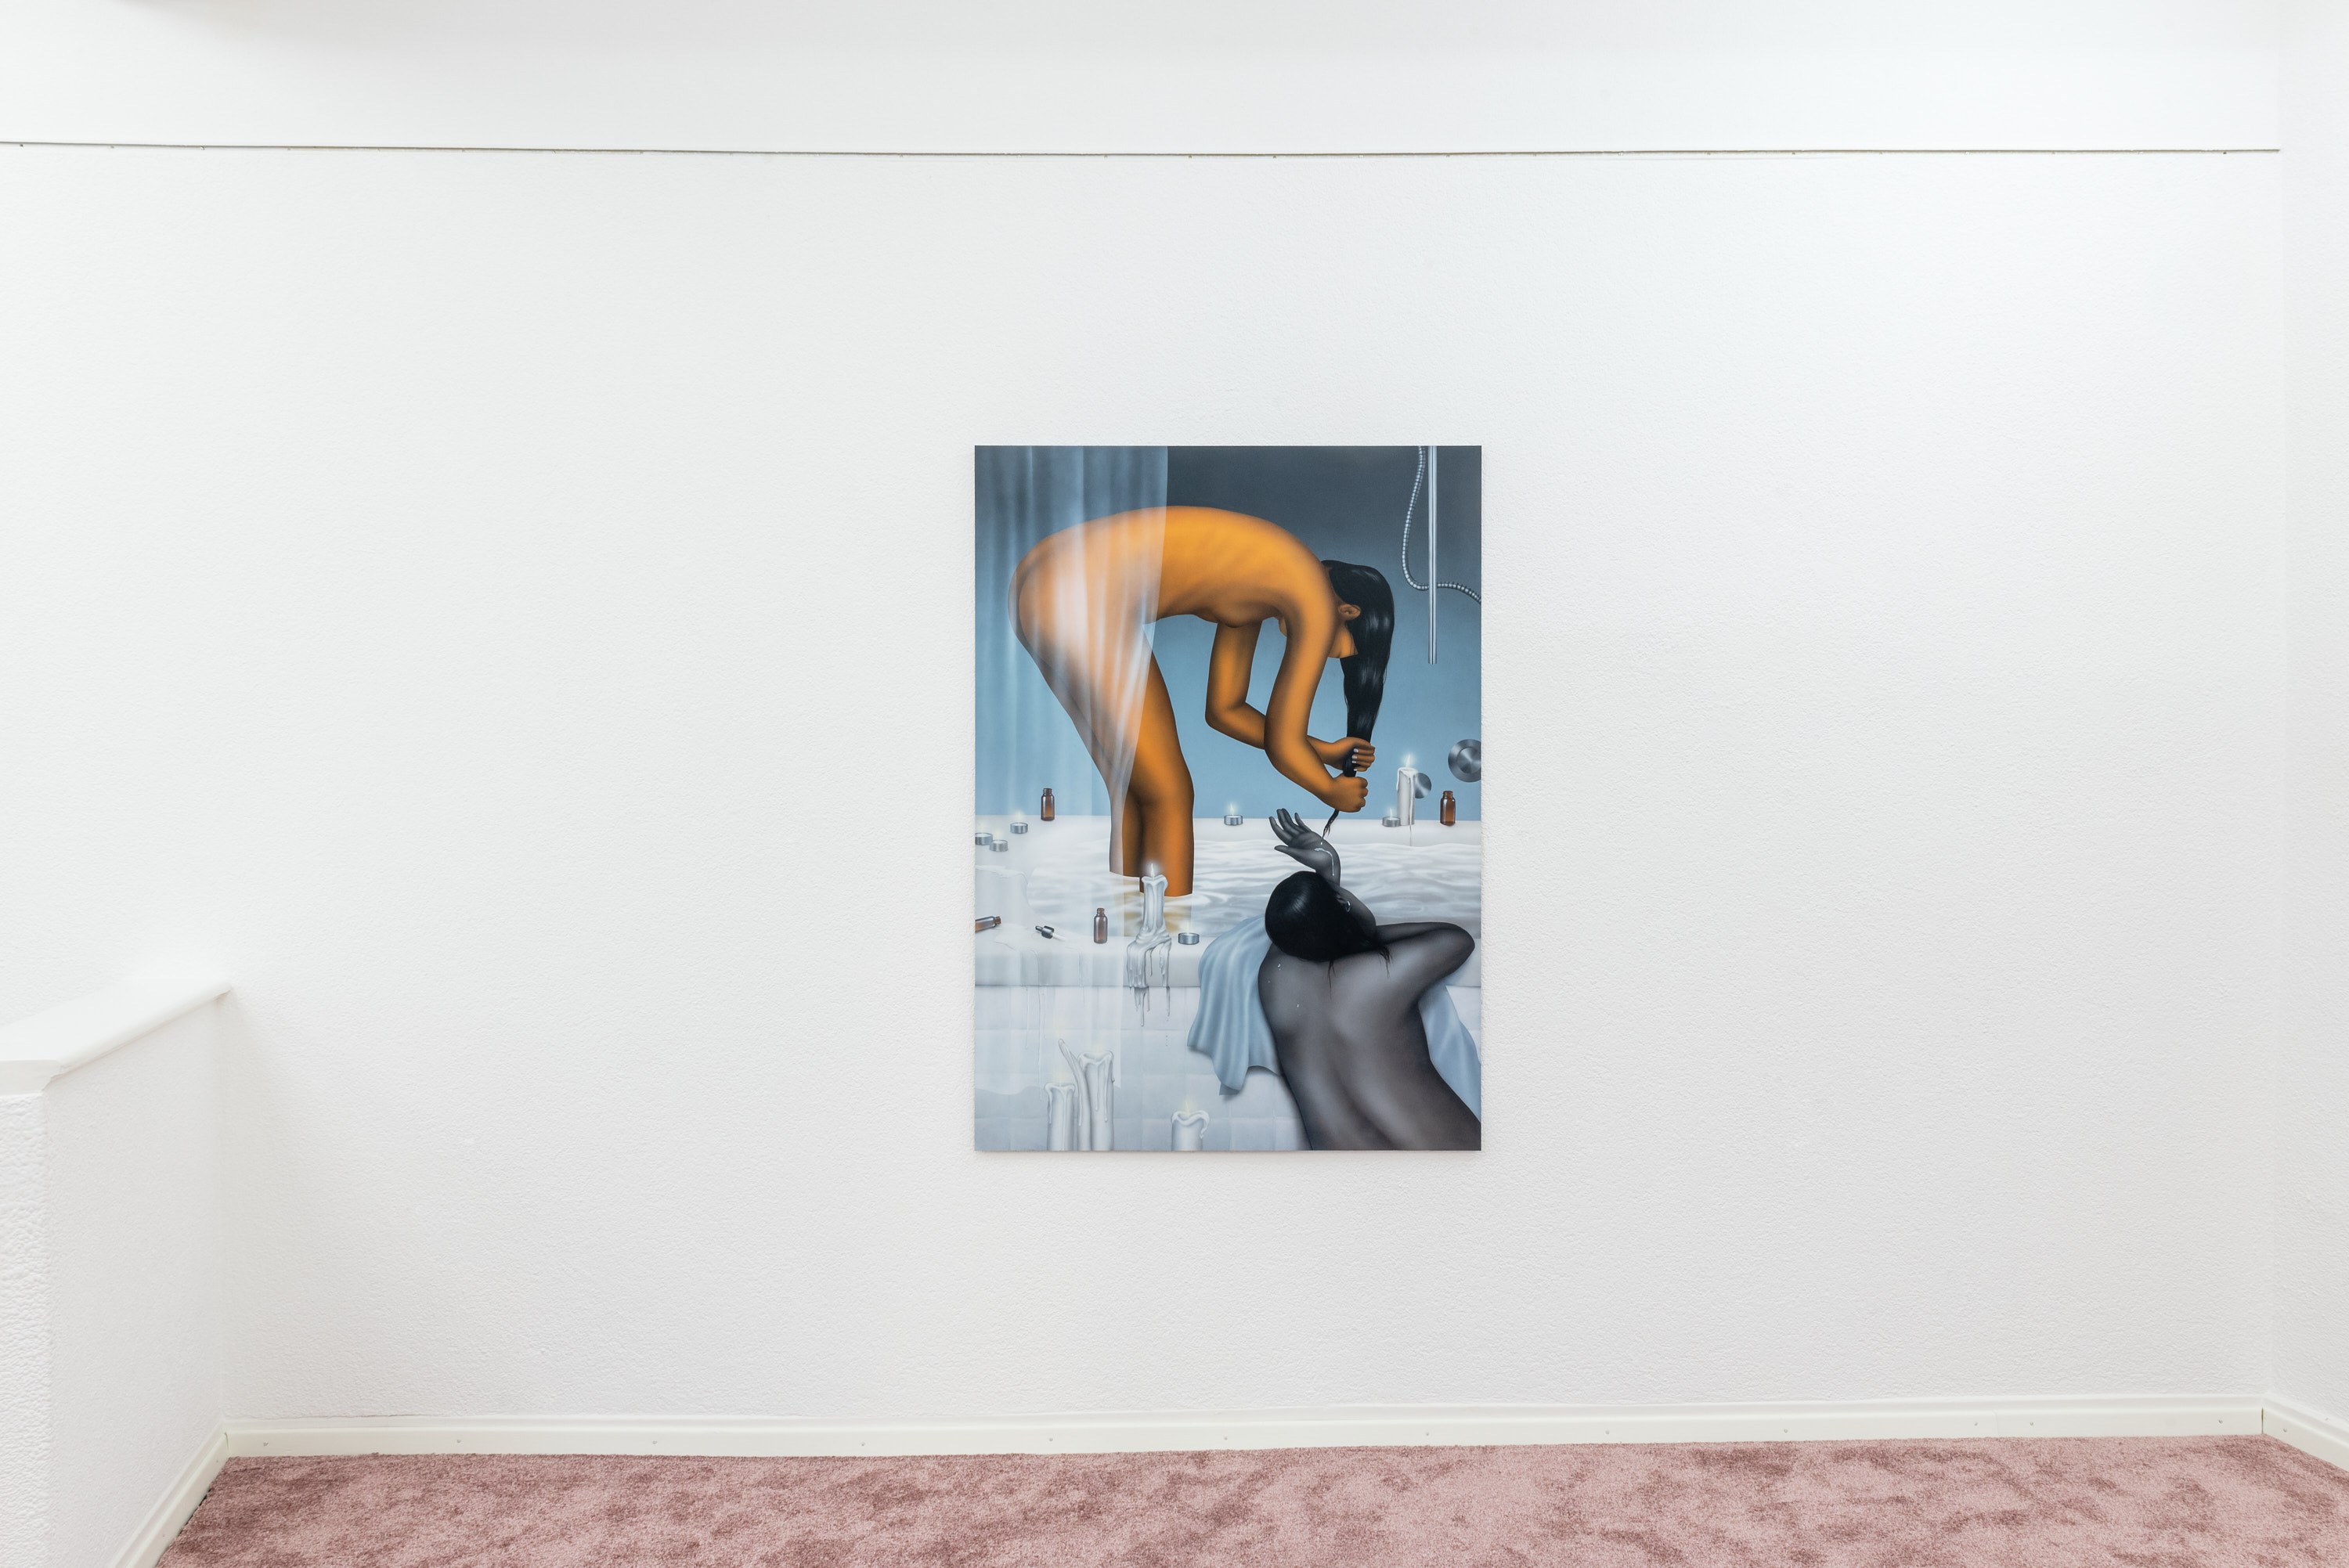 CÃ©line Ducrot, Believe me Iâ€™m trying, installation view 2022. Acrylic on wood 